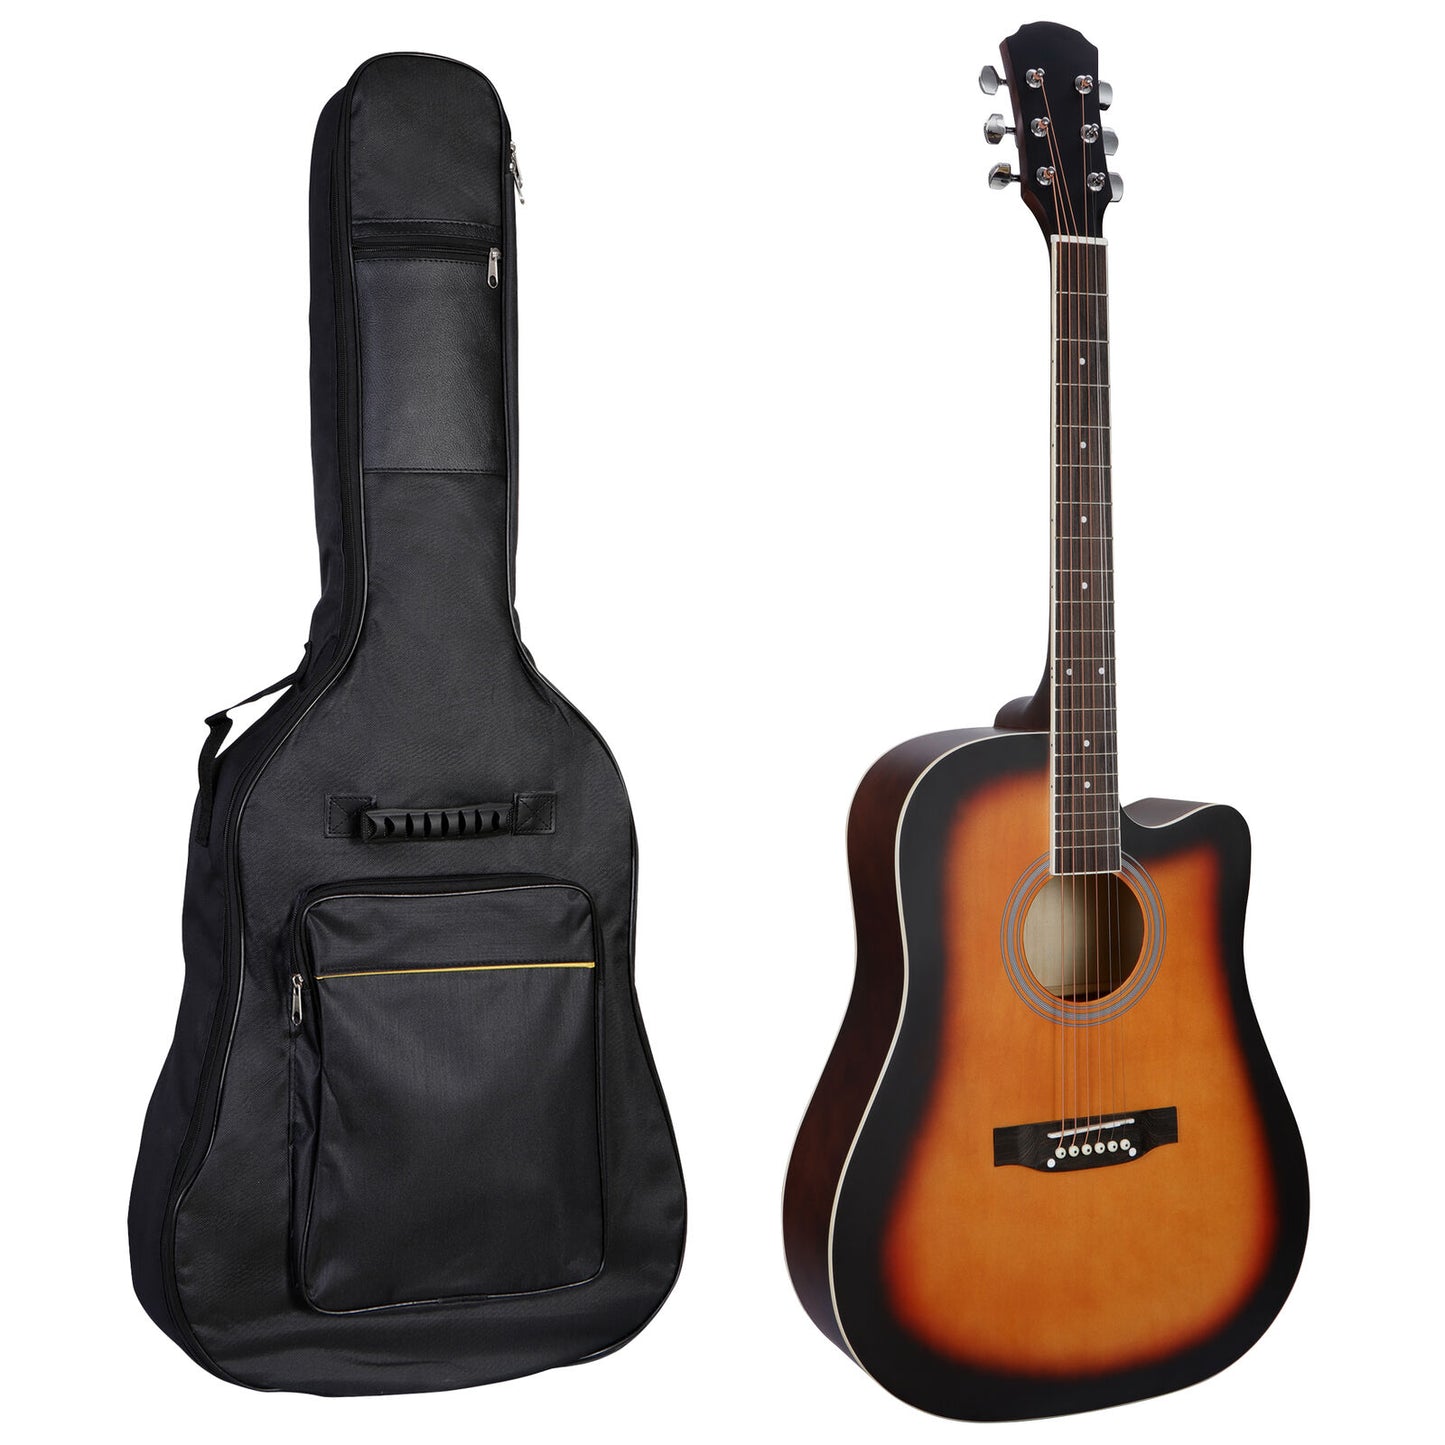 41" Full Size Beginner Acoustic Guitar Set with Case Strap Capo Strings Tuner